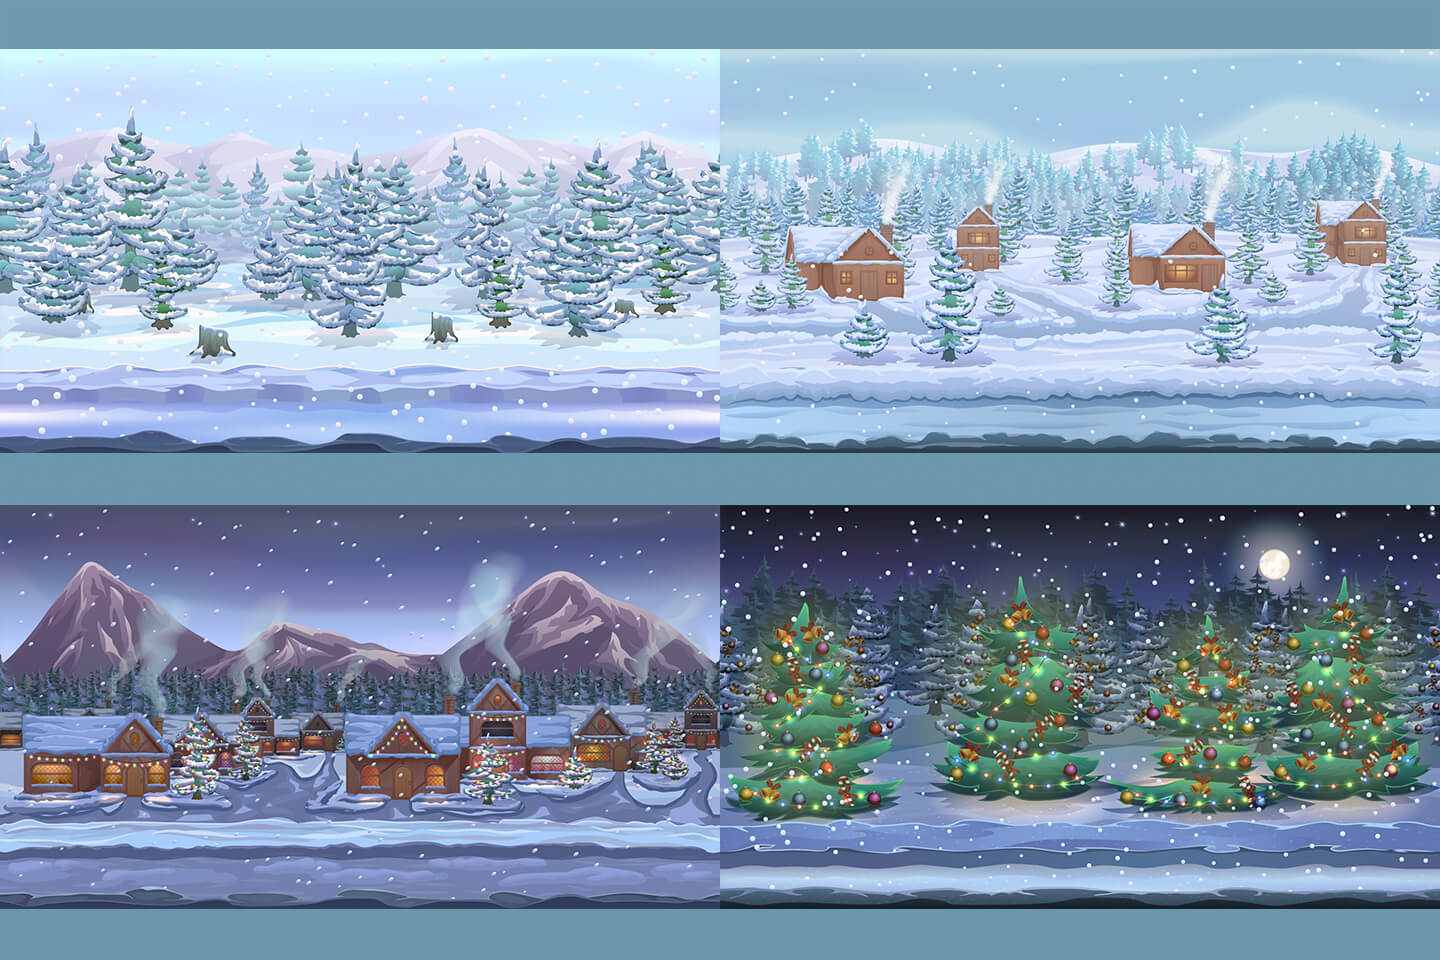 video game backgrounds sprites